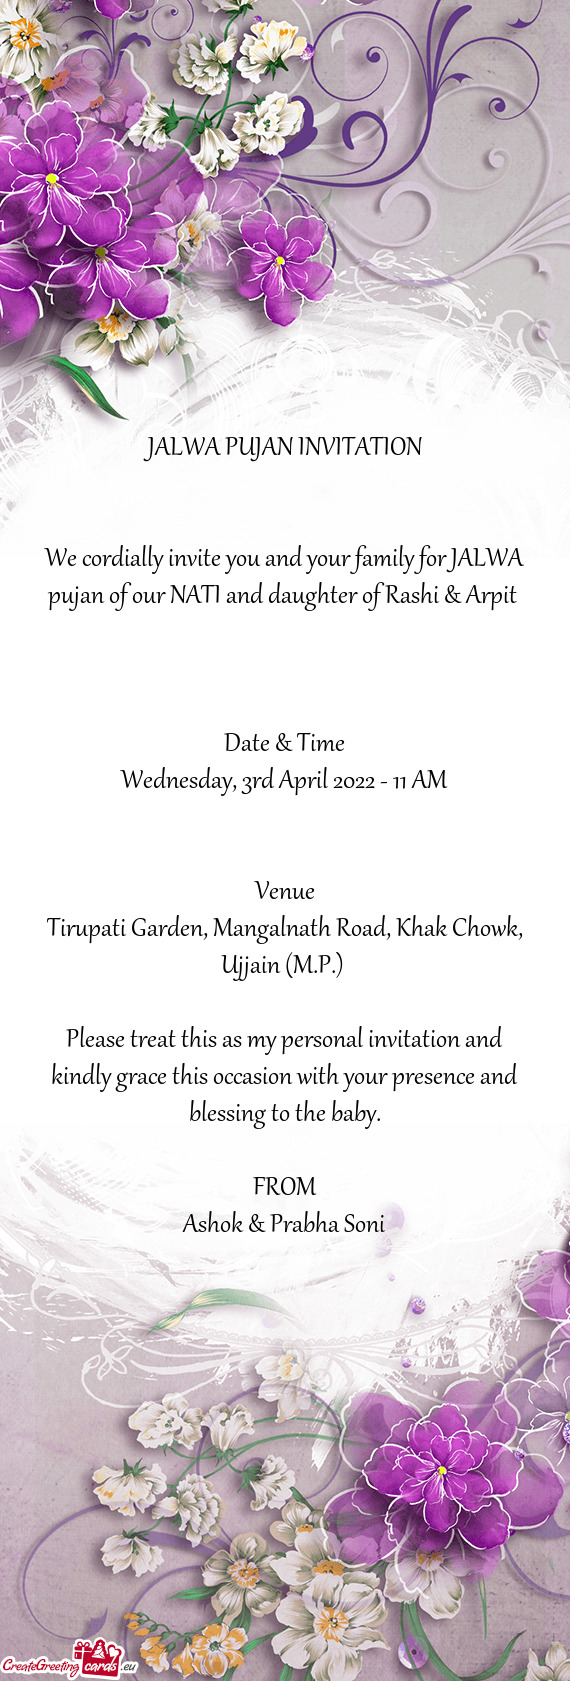 We cordially invite you and your family for JALWA pujan of our NATI and daughter of Rashi & Arpit